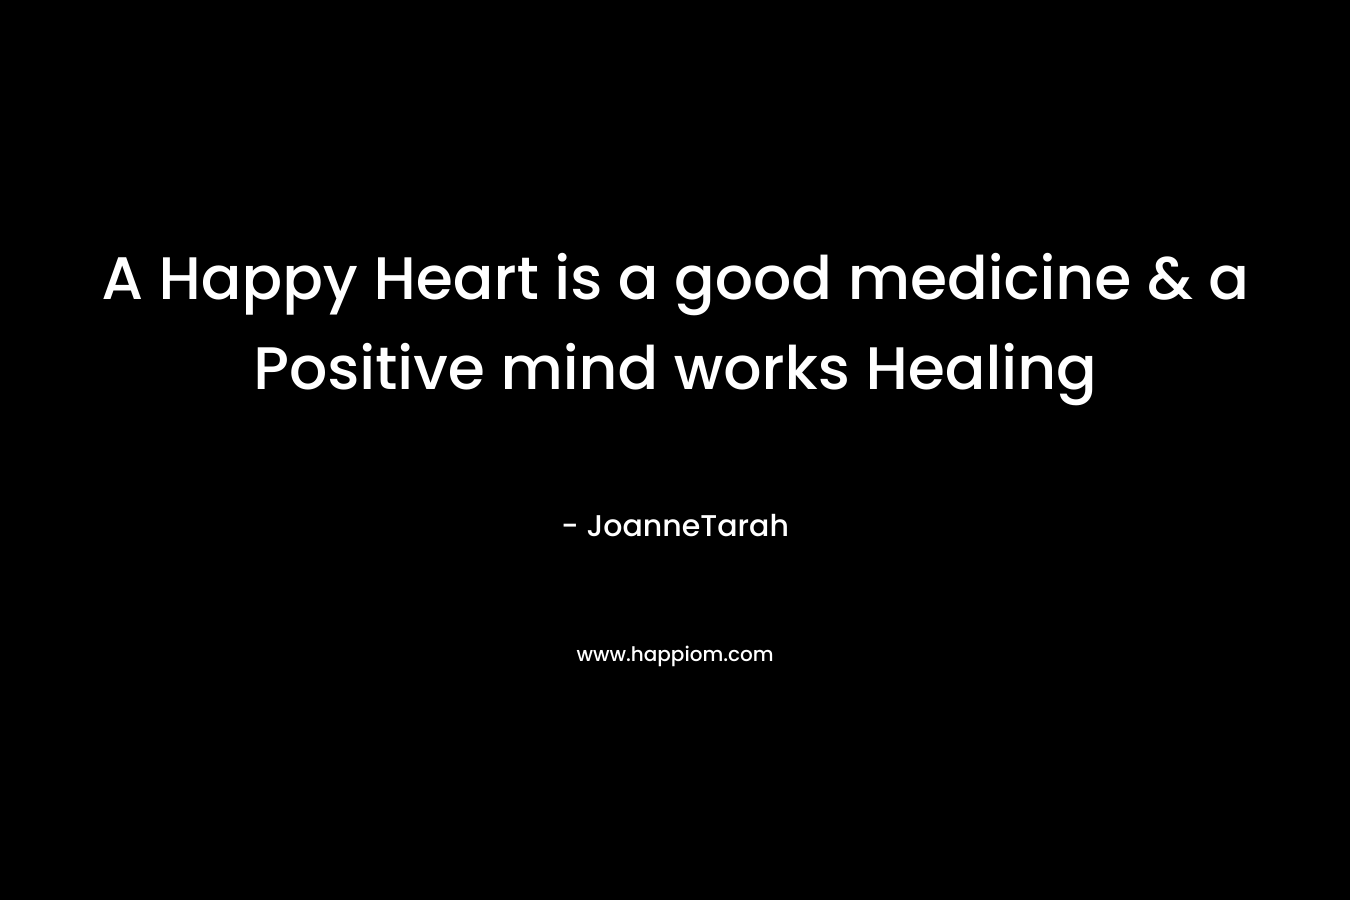 A Happy Heart is a good medicine & a Positive mind works Healing